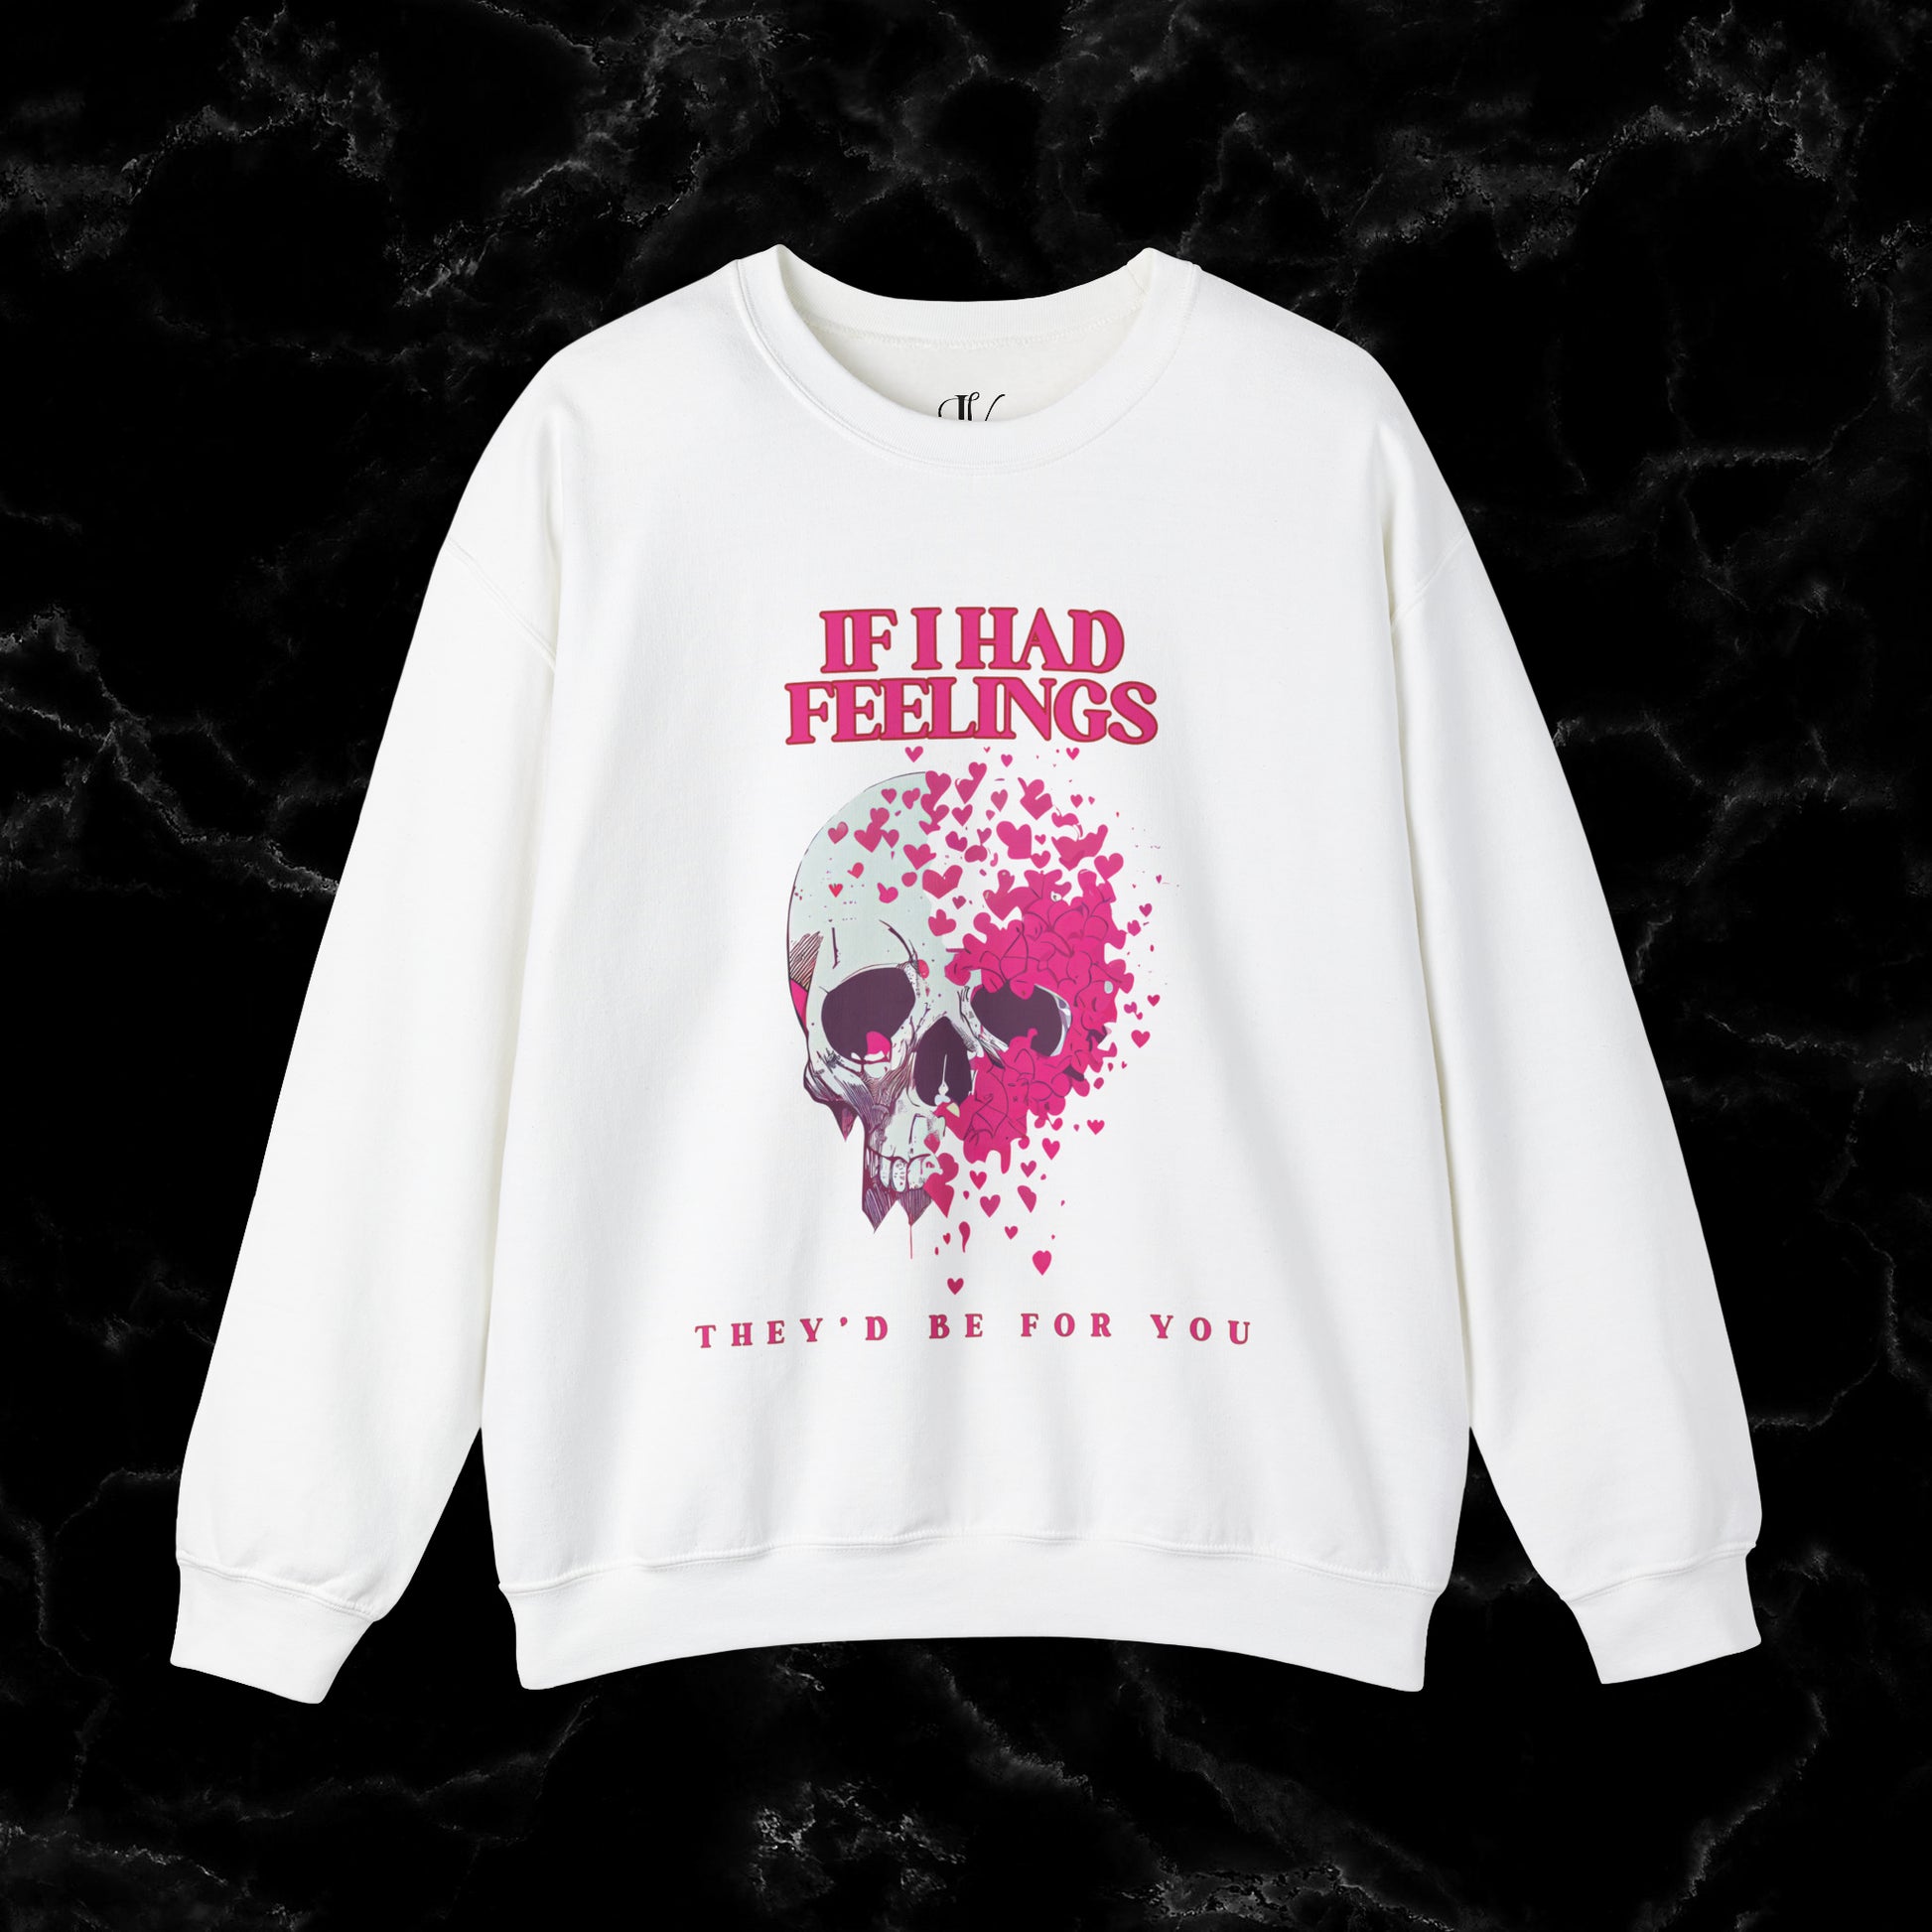 If I Had Feelings, They'd Be For You Sweatshirt - Skeleton Valentines Sweatshirt - Funny Valentines Sweater - Women's Valentines - Valentines Gift Sweatshirt S White 